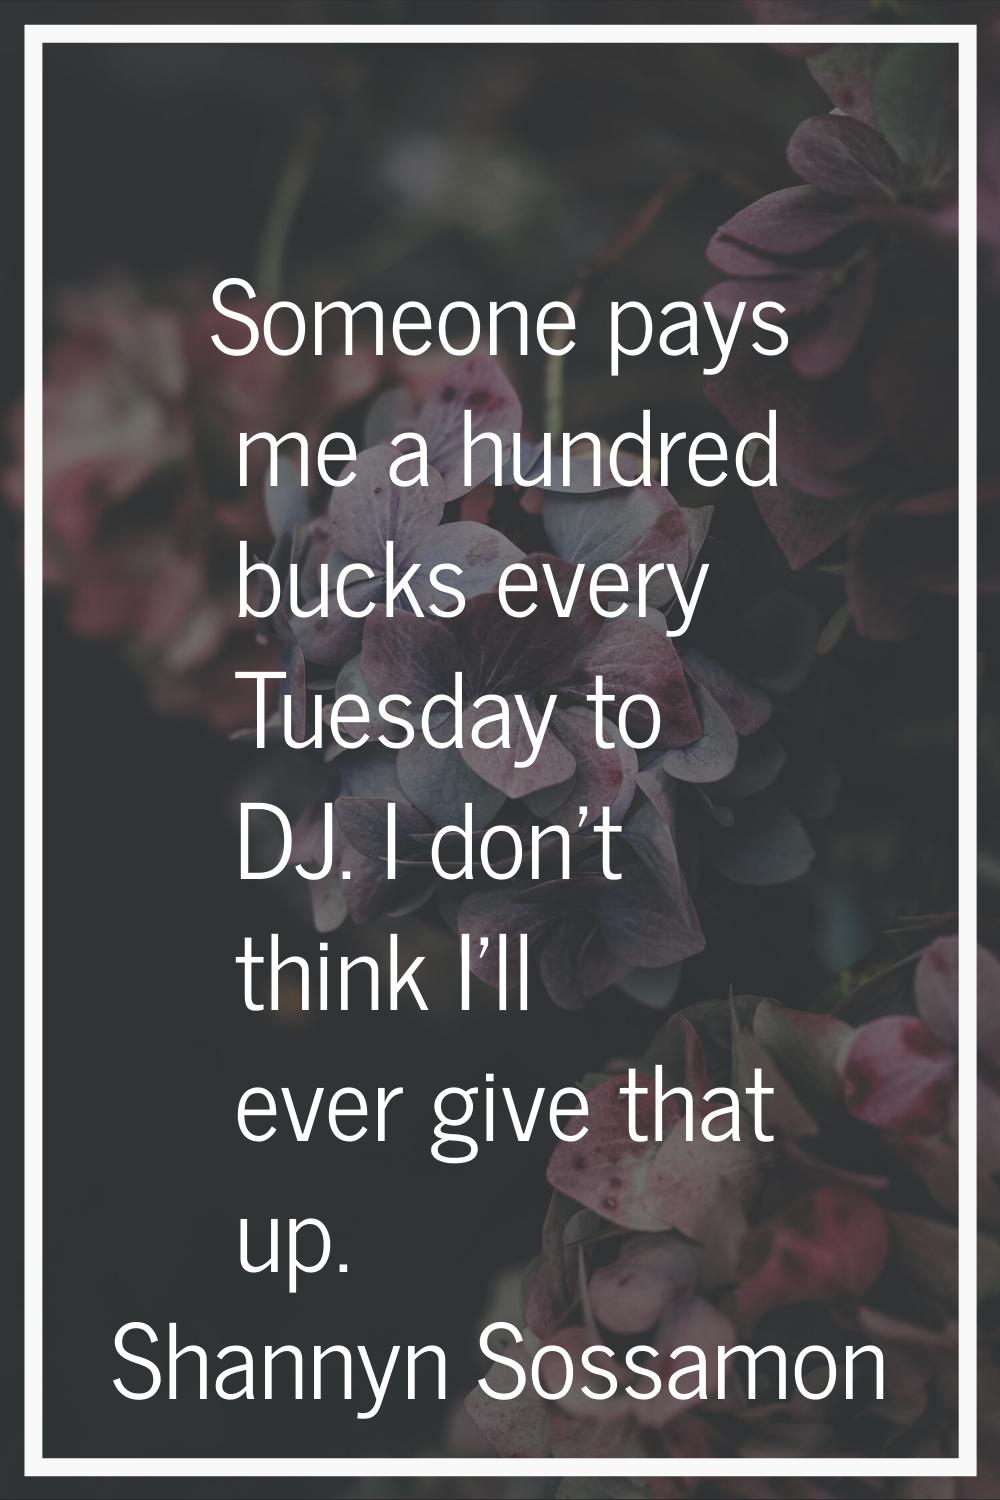 Someone pays me a hundred bucks every Tuesday to DJ. I don't think I'll ever give that up.